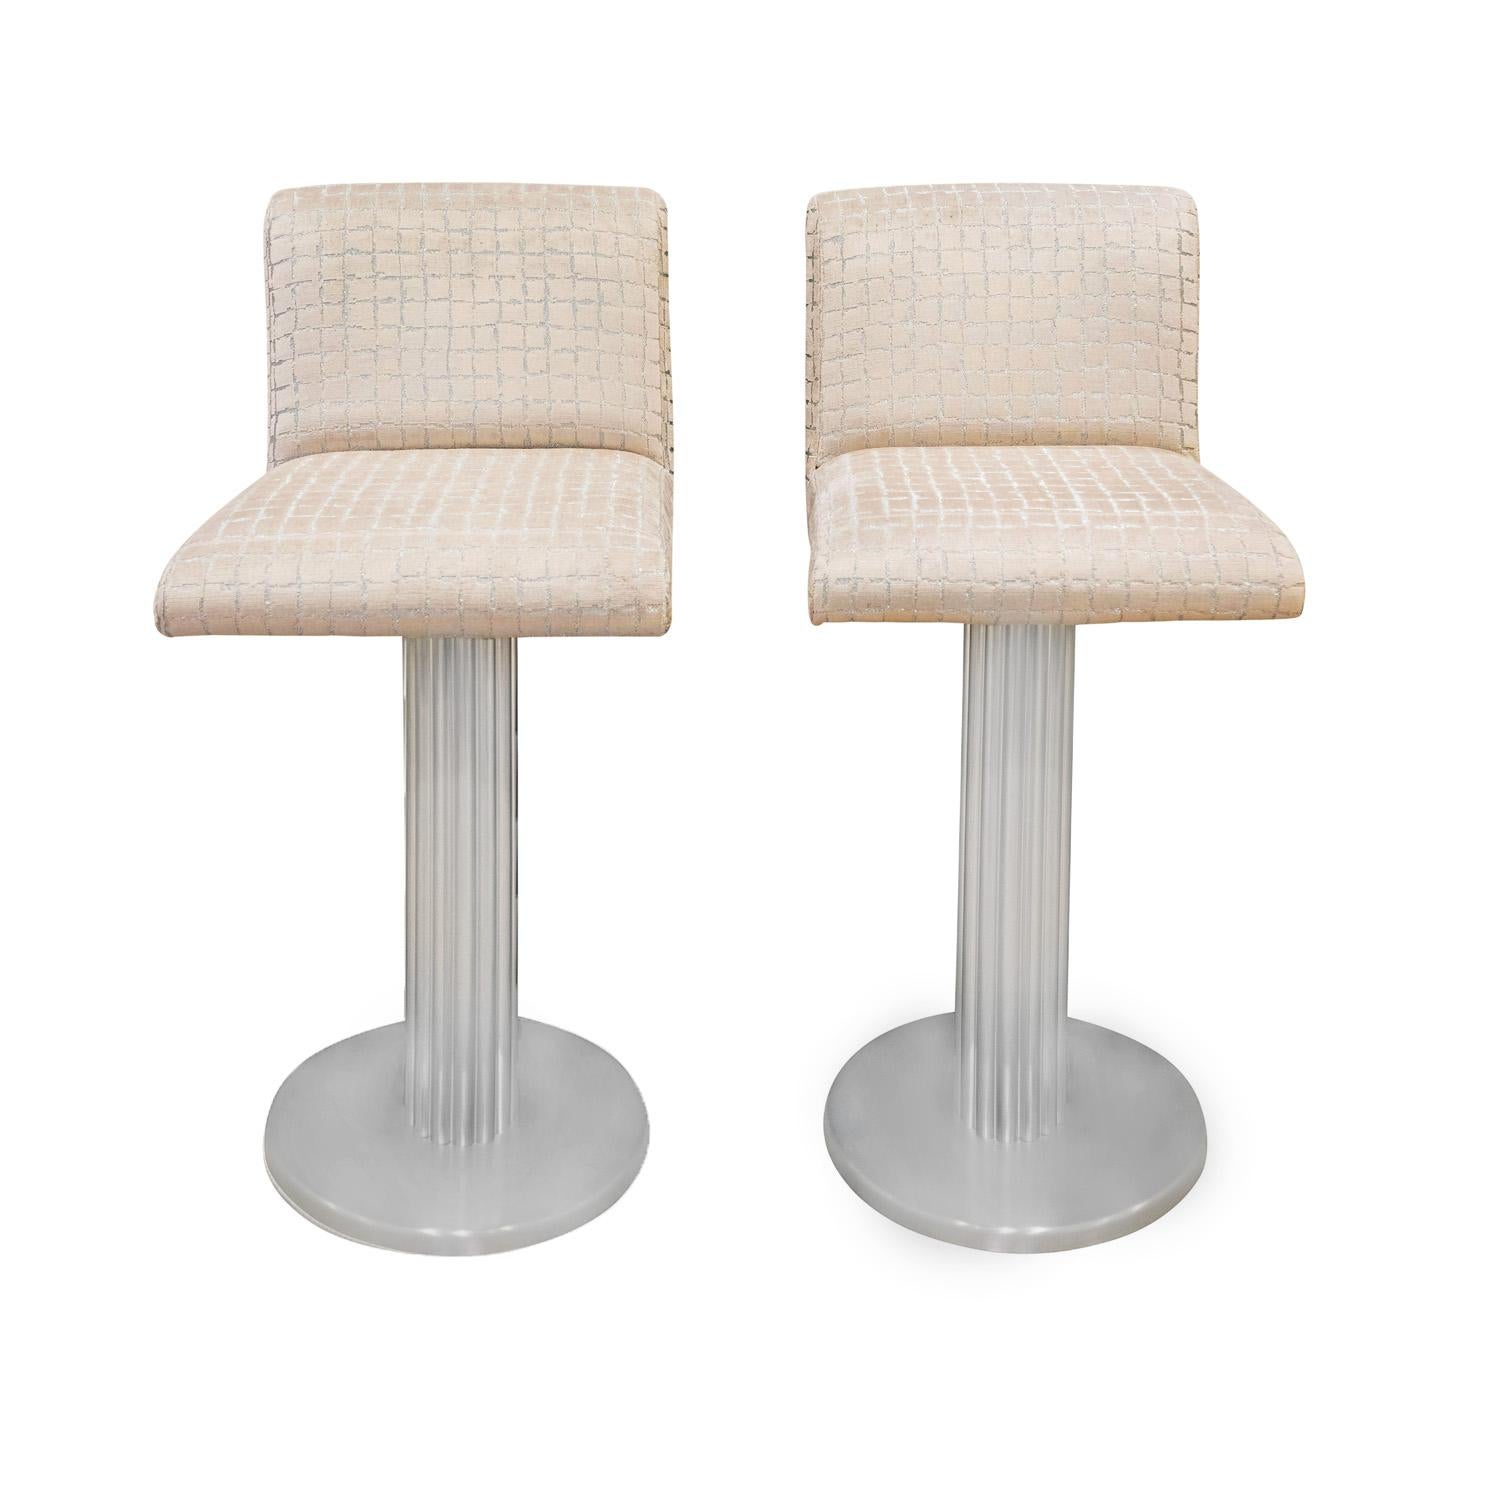 Pair of beautifully made bar stools in brushed aluminum with swiveling upholstered seats by Designs for Leisure, American 1970's. These bar stools are very comfortable and very chic. Metal has been professionally cleaned and buffed. Seats have been